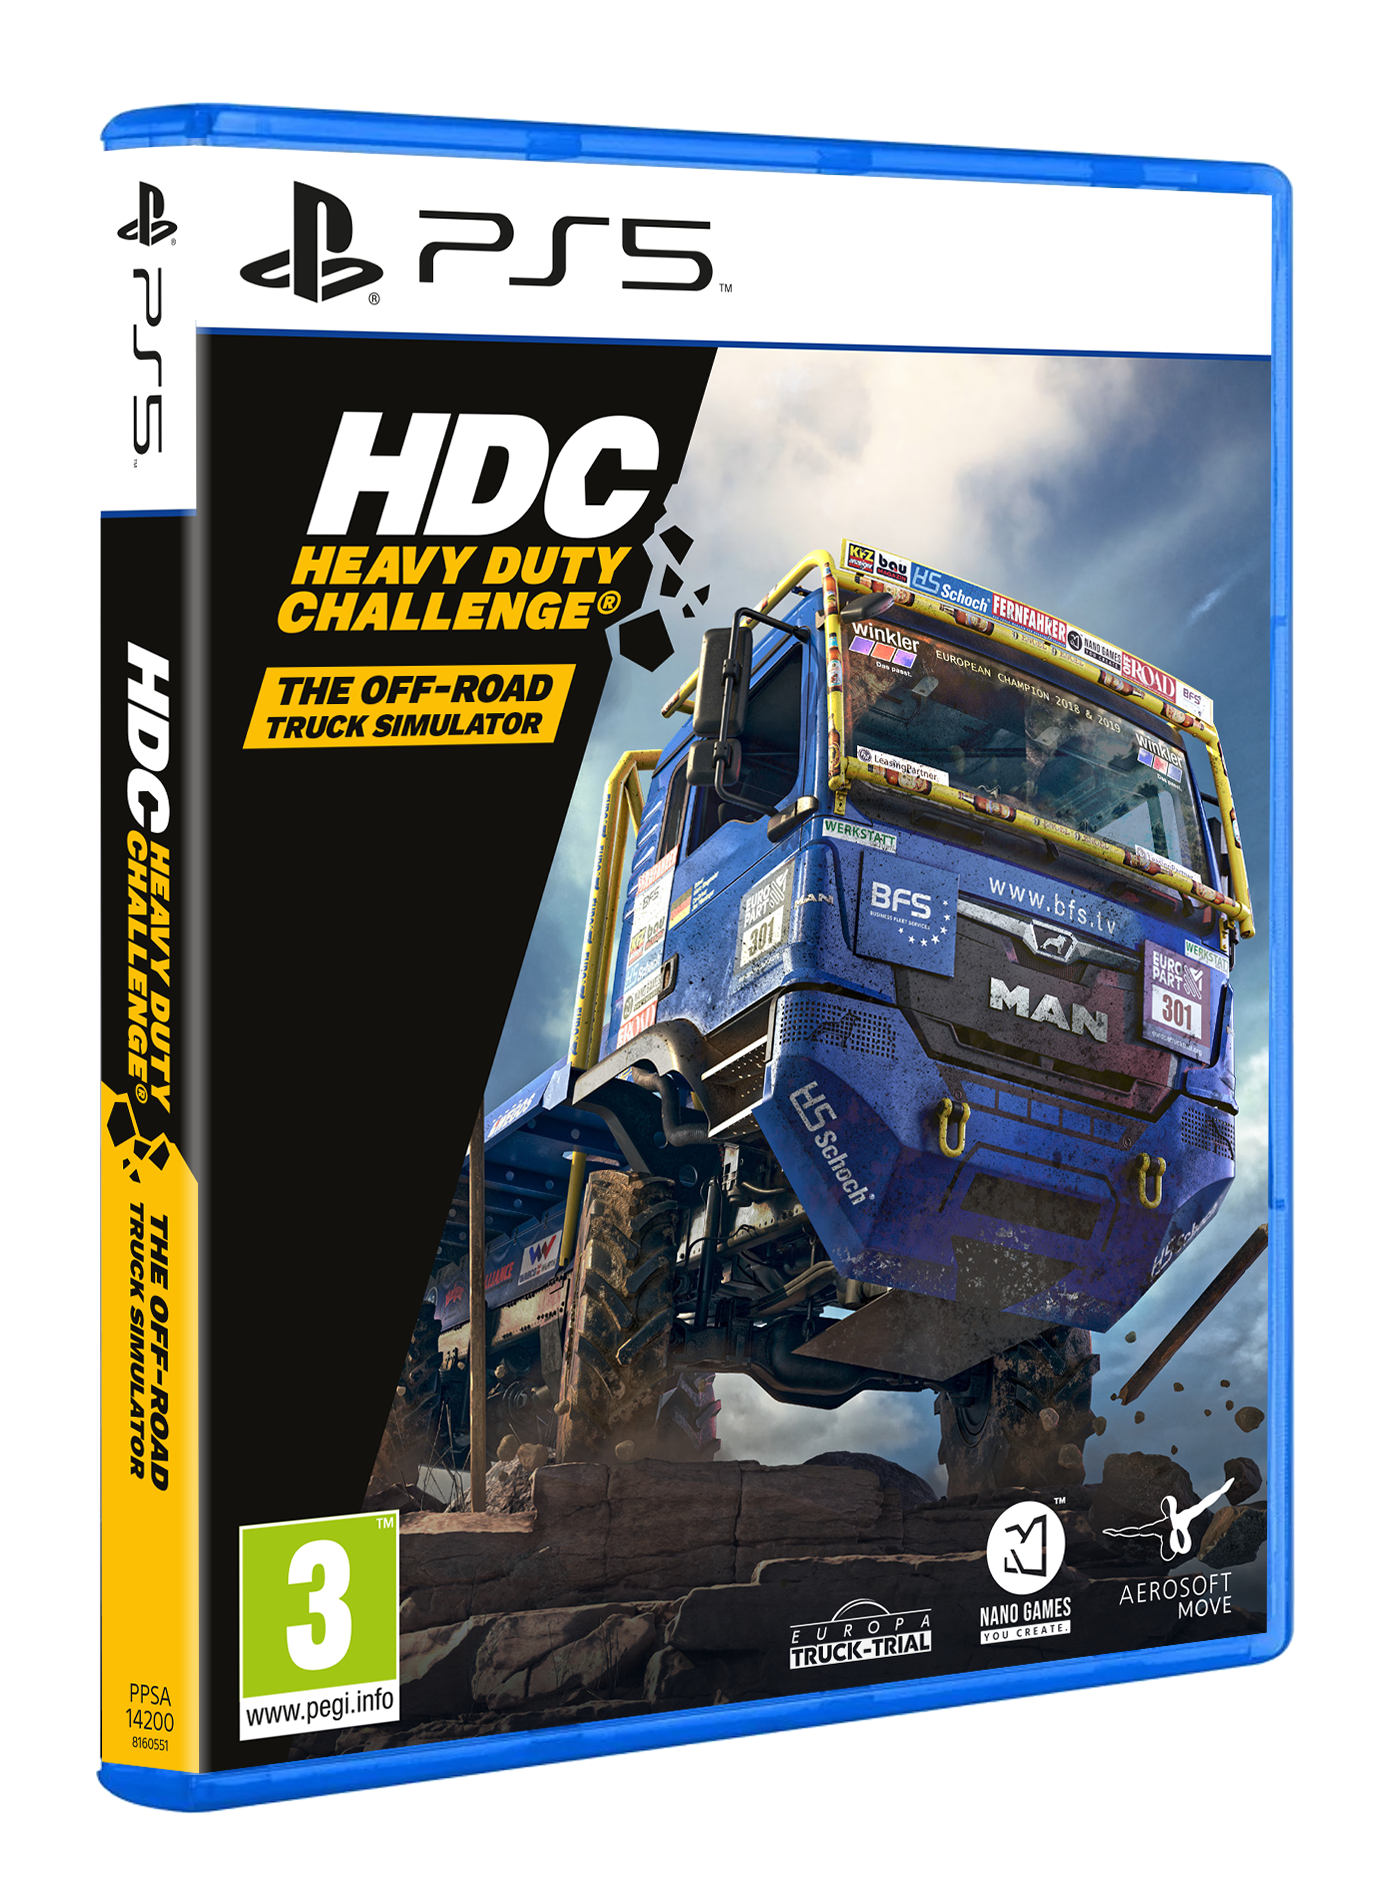 https://scale.coolshop-cdn.com/product-media.coolshop-cdn.com/23GT7N/cd7c2faf278a41a190617384c117c197.png/f/heavy-duty-challenge-off-road-truck-simulator.png